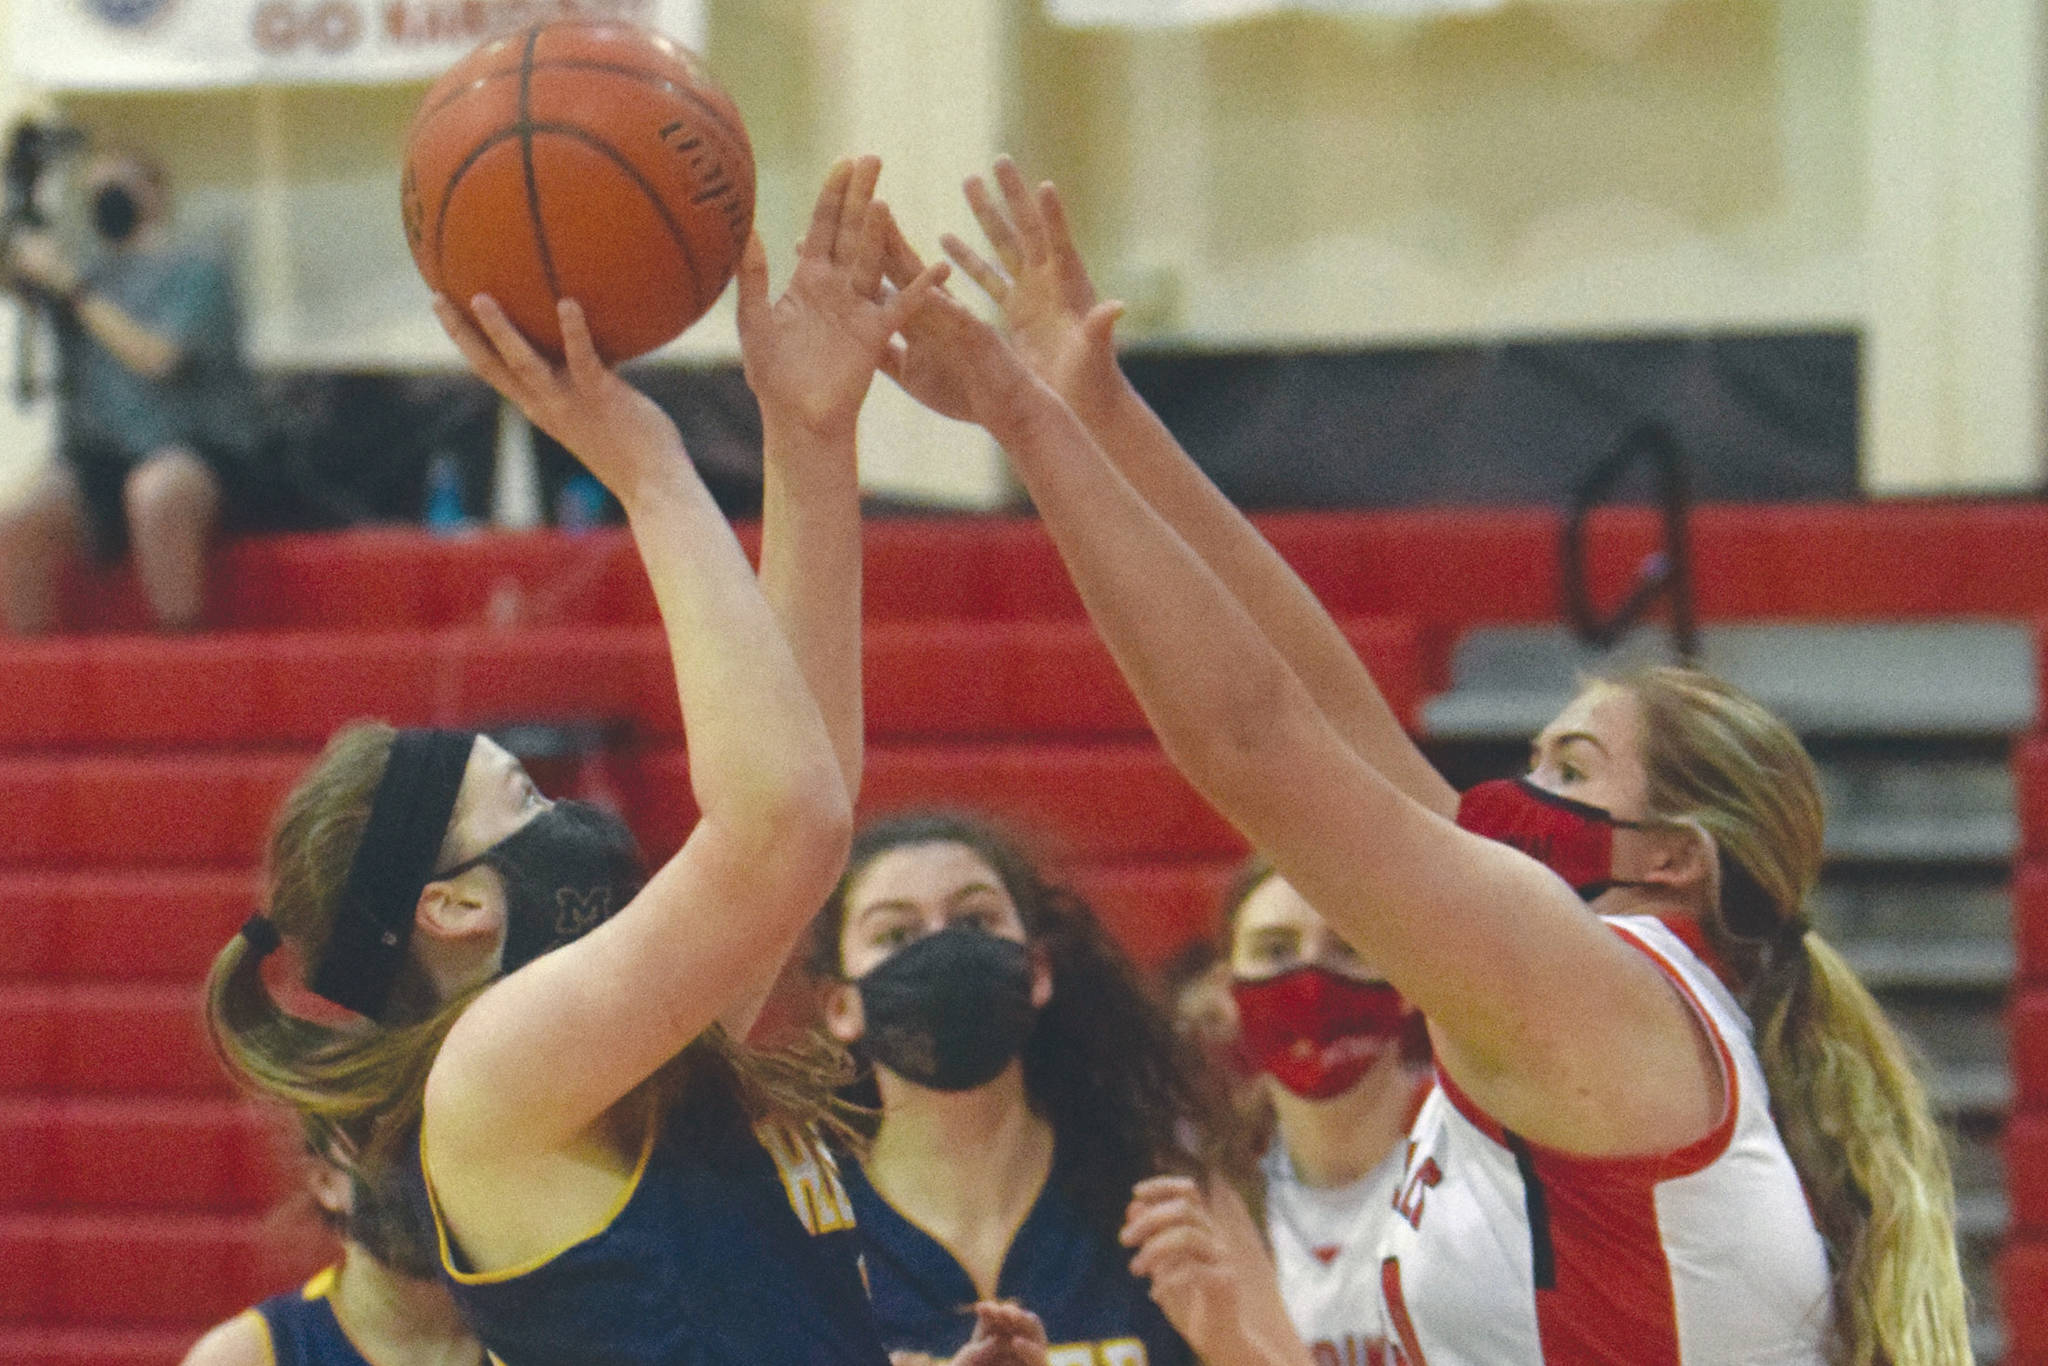 Homer's Sophie Ellison goes up for a shot against Kenai Central's Emma Beck on Thursday, March 4, 2021, at Kenai Central High School in Kenai, Alaska. (Photo by Jeff Helminiak/Peninsula Clarion)